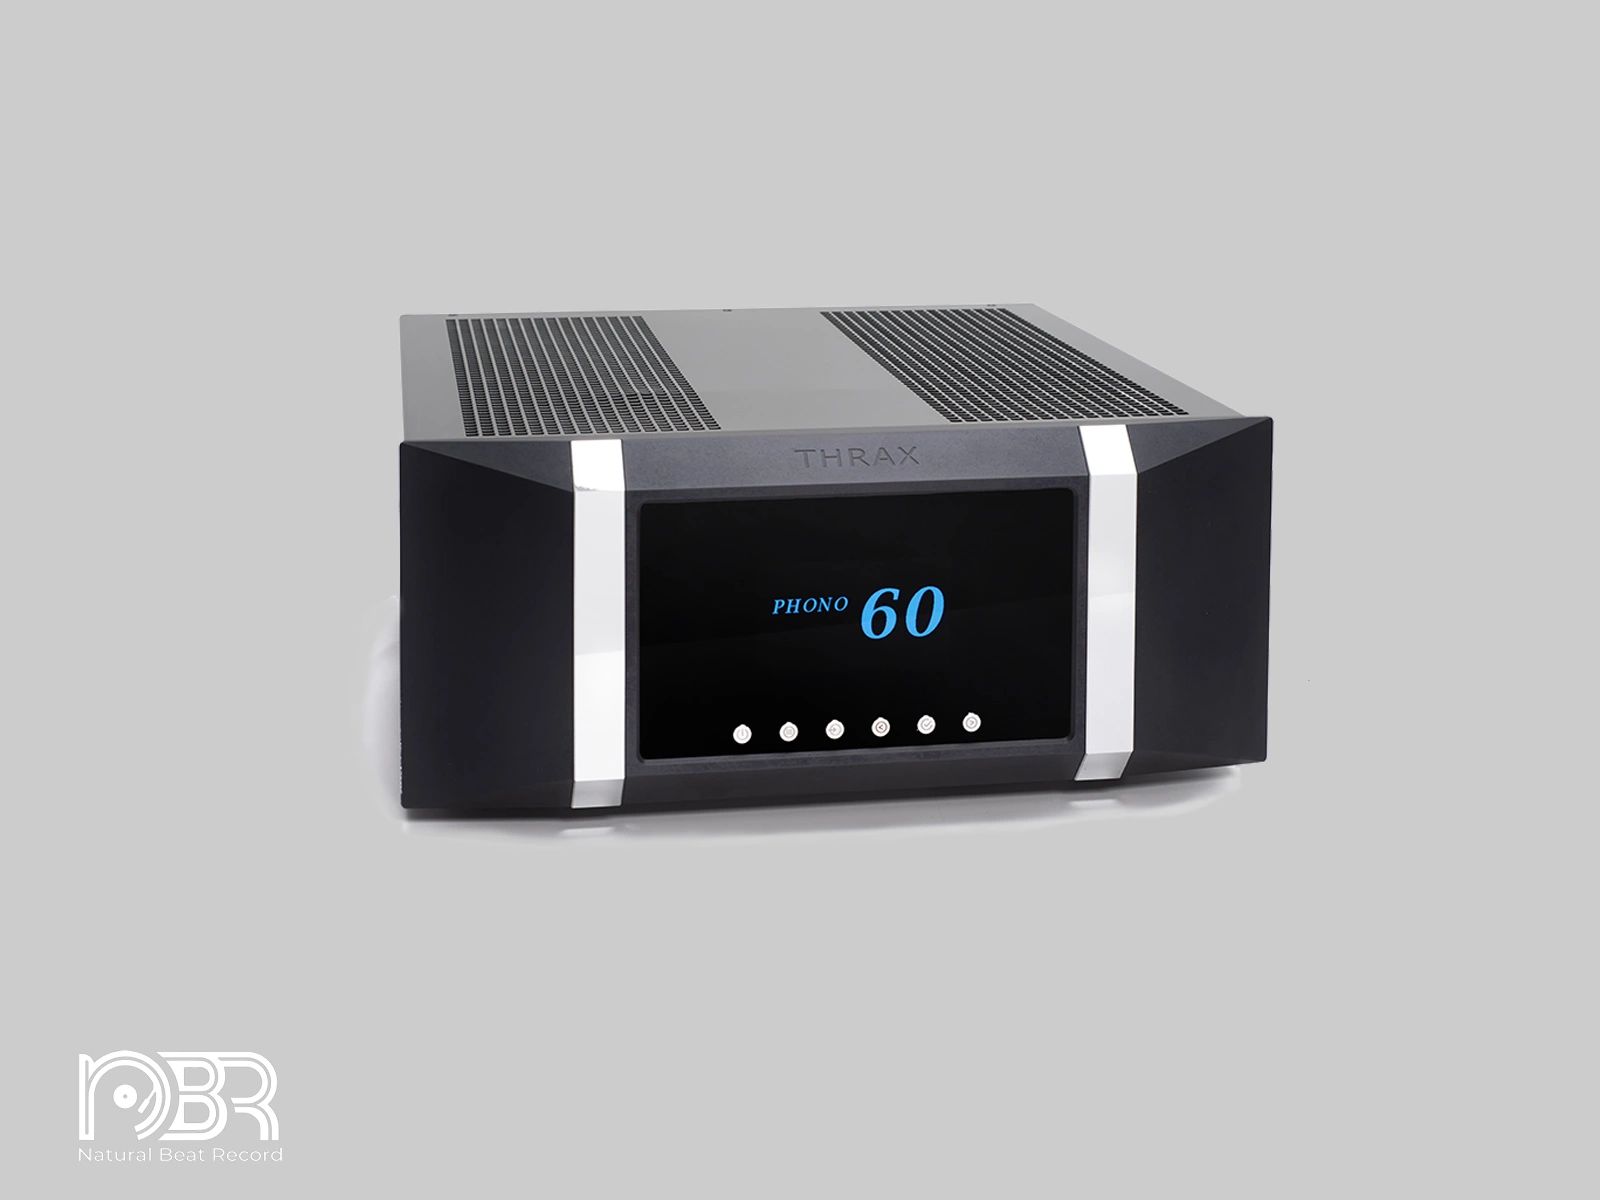 The Thrax Enyo Integrated Amplifier